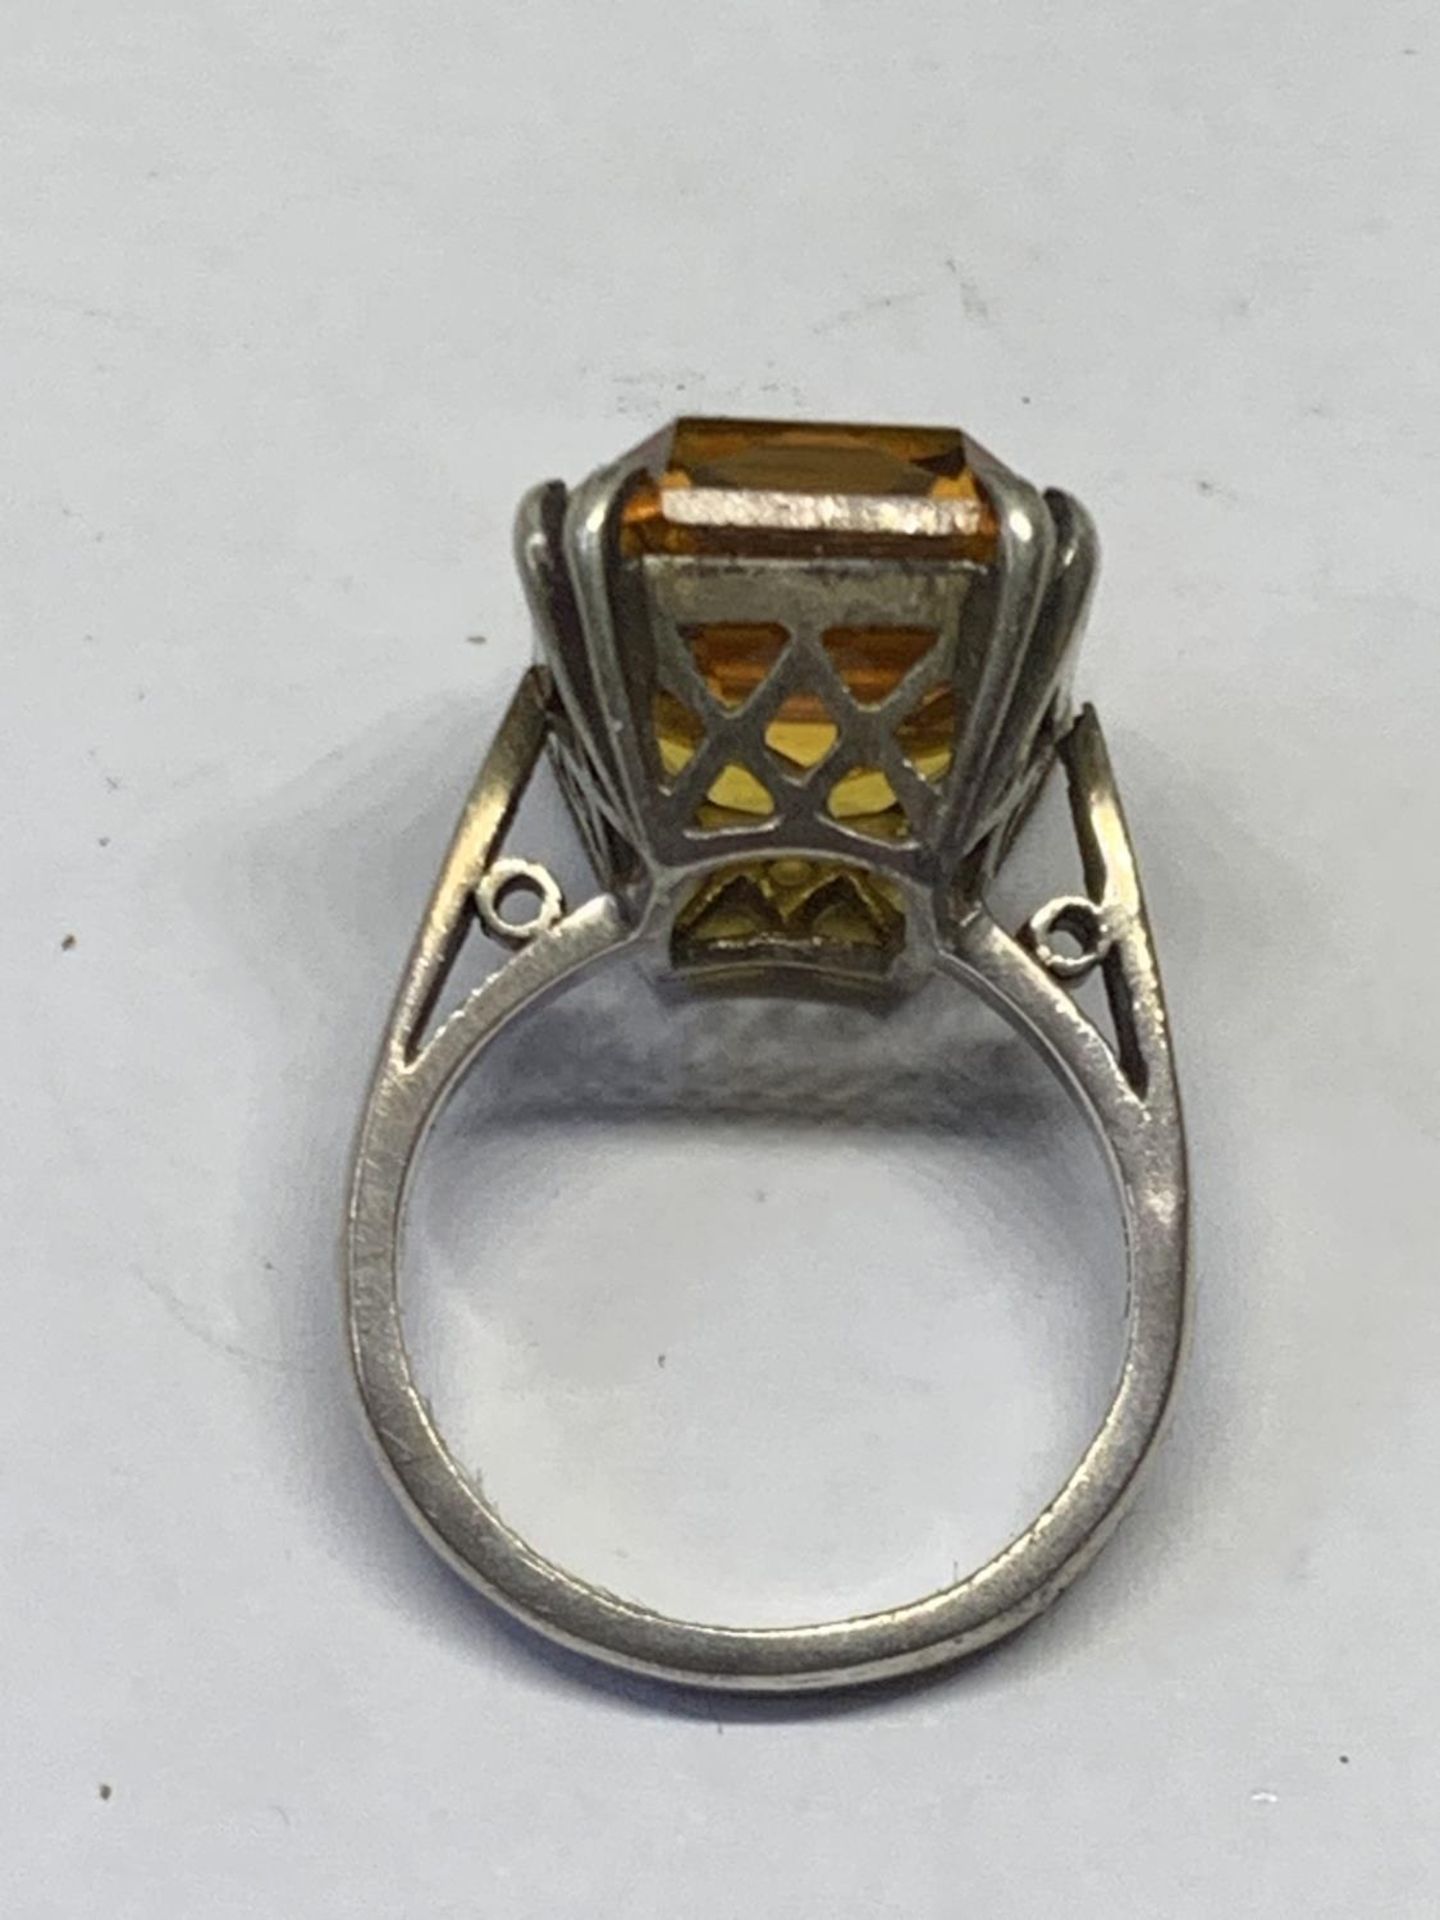 A SILVER AND YELLOW STONE RING IN A PRESENTATION BOX - Image 3 of 3